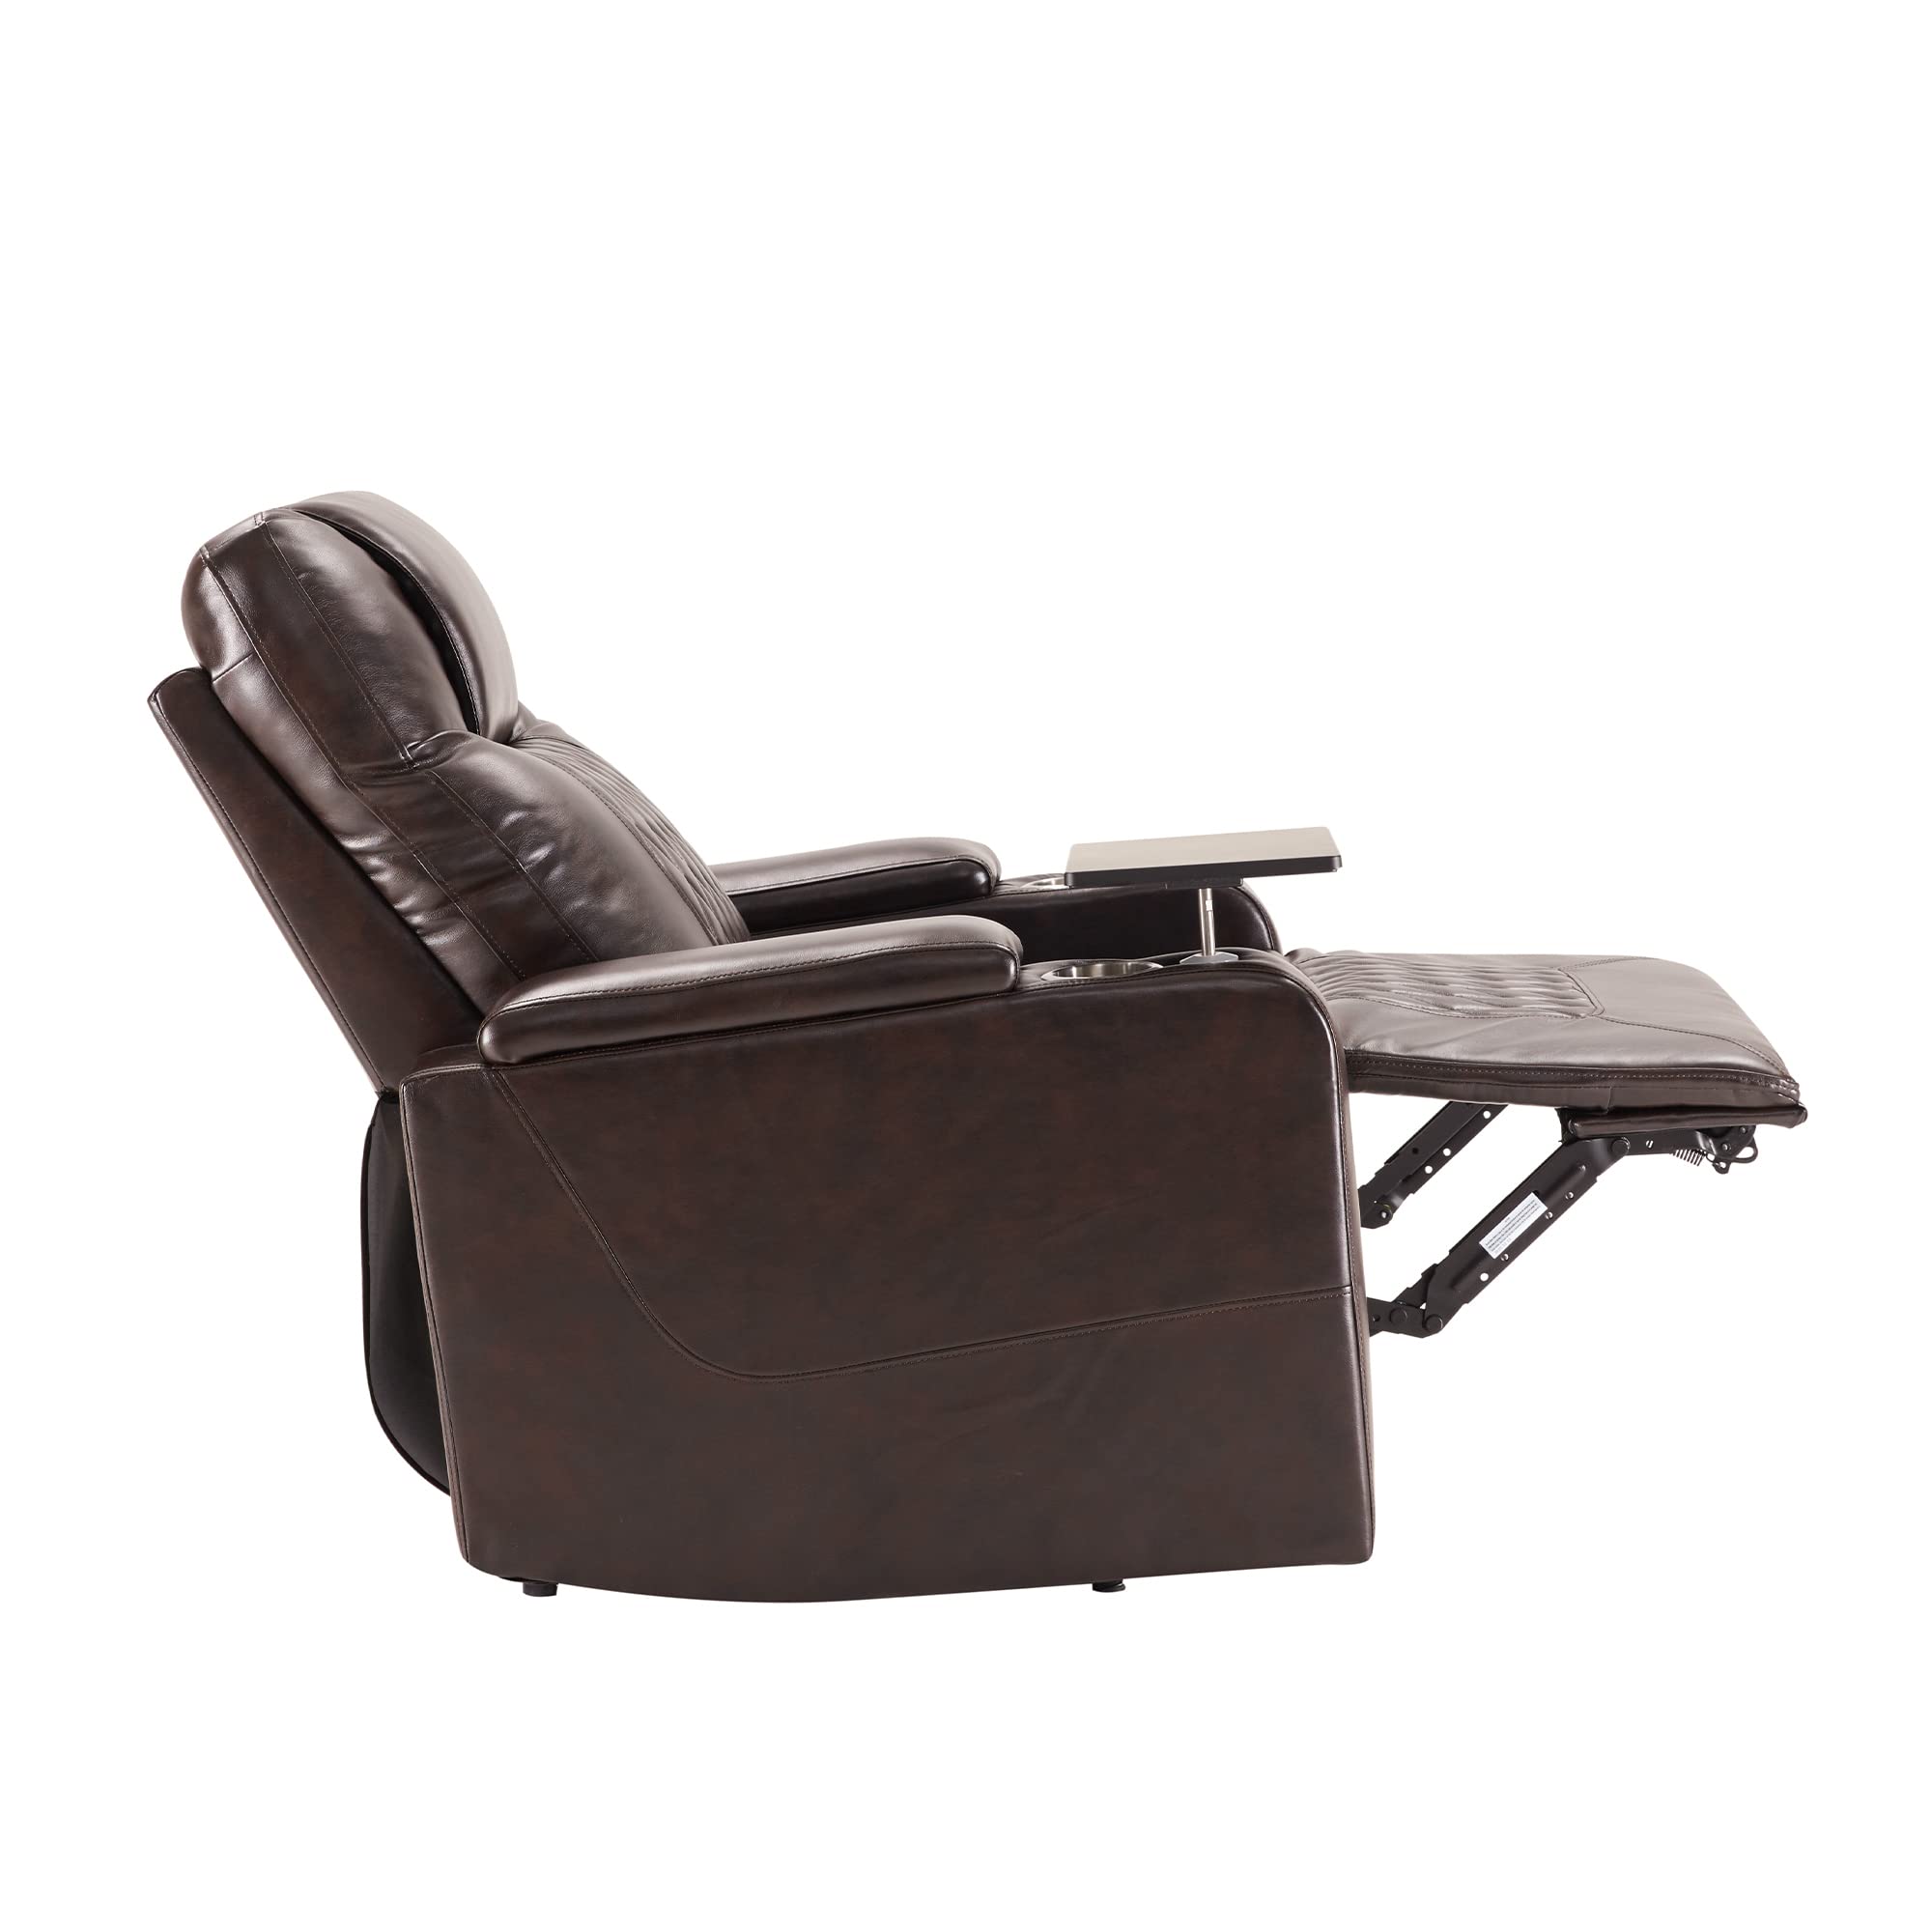 Merax Power Recliner Chair, Leather Lazy Boy Single Sofa with Cup Holders, Tray Table and Storage, 37.8" D x 35.8" W x 42.1" H, Brown